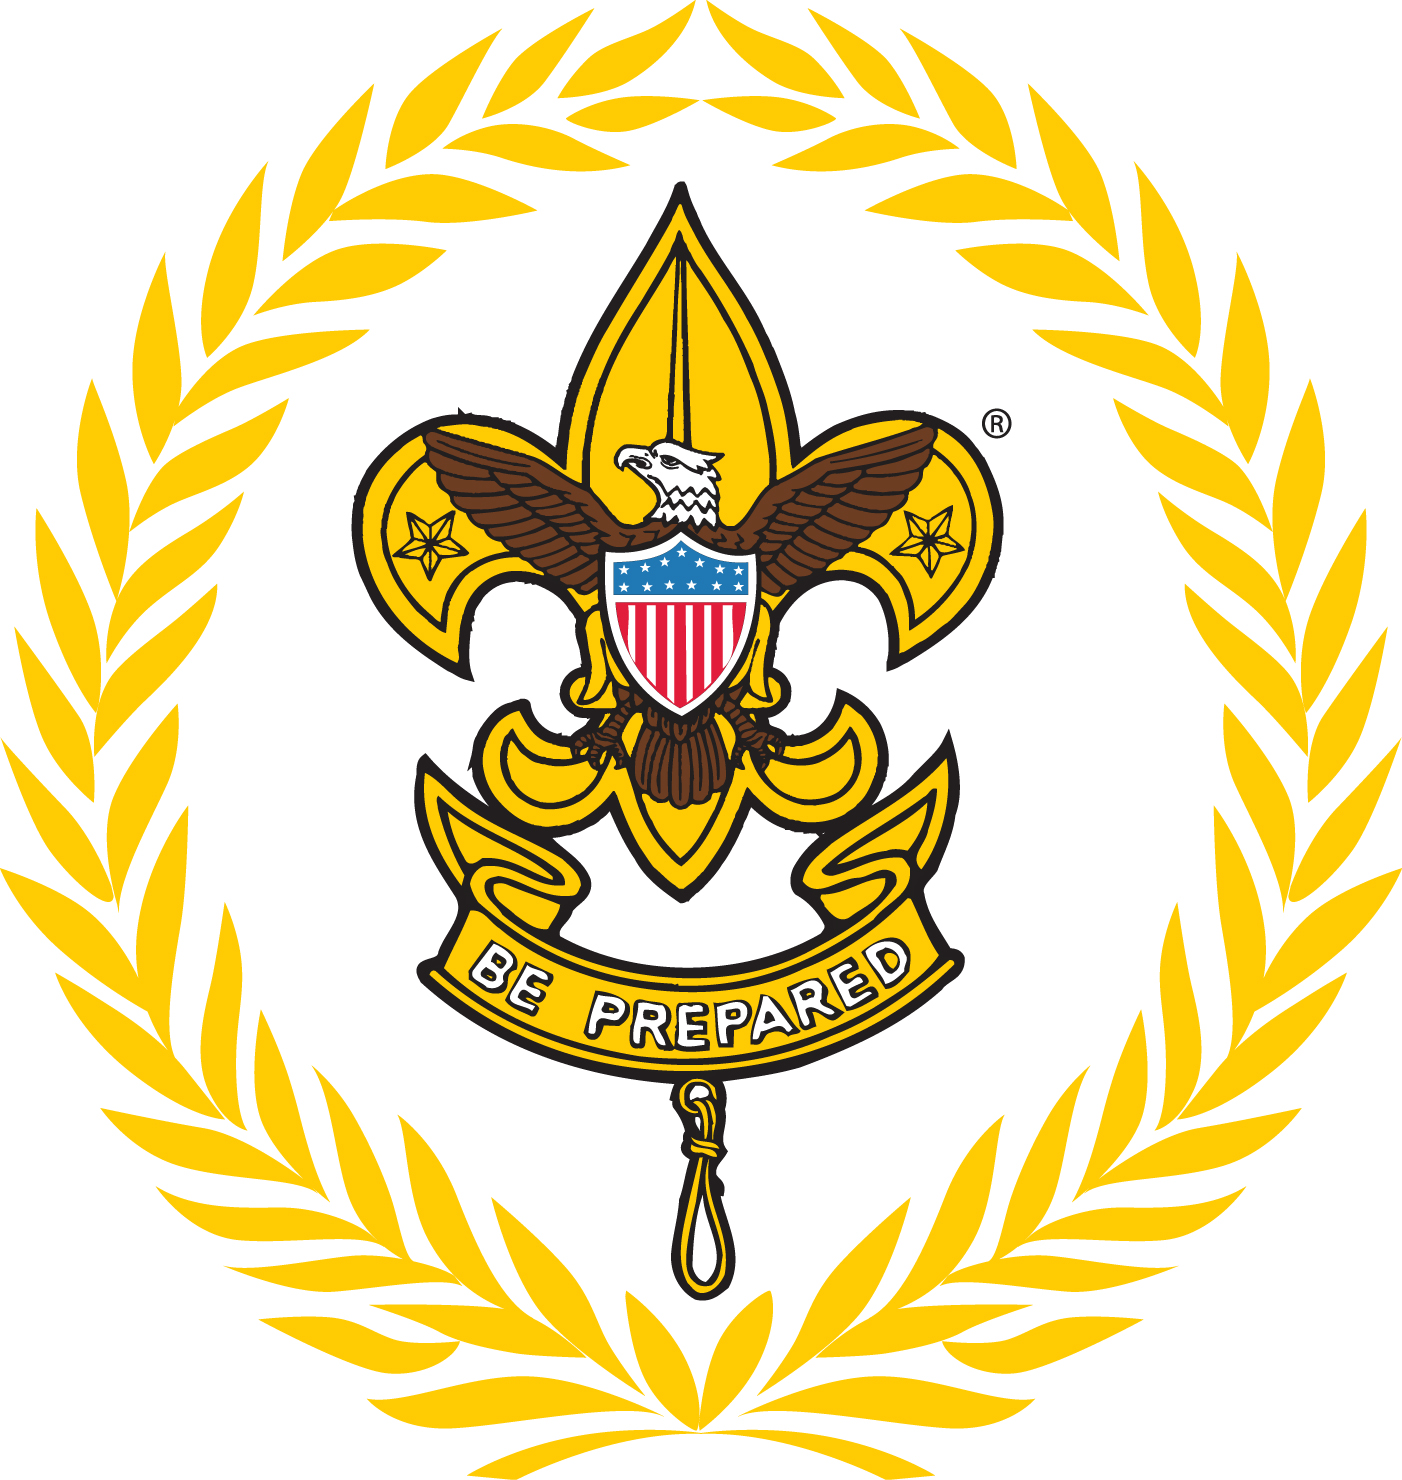 Boy Scouts Of America Logo Vector At Collection Of